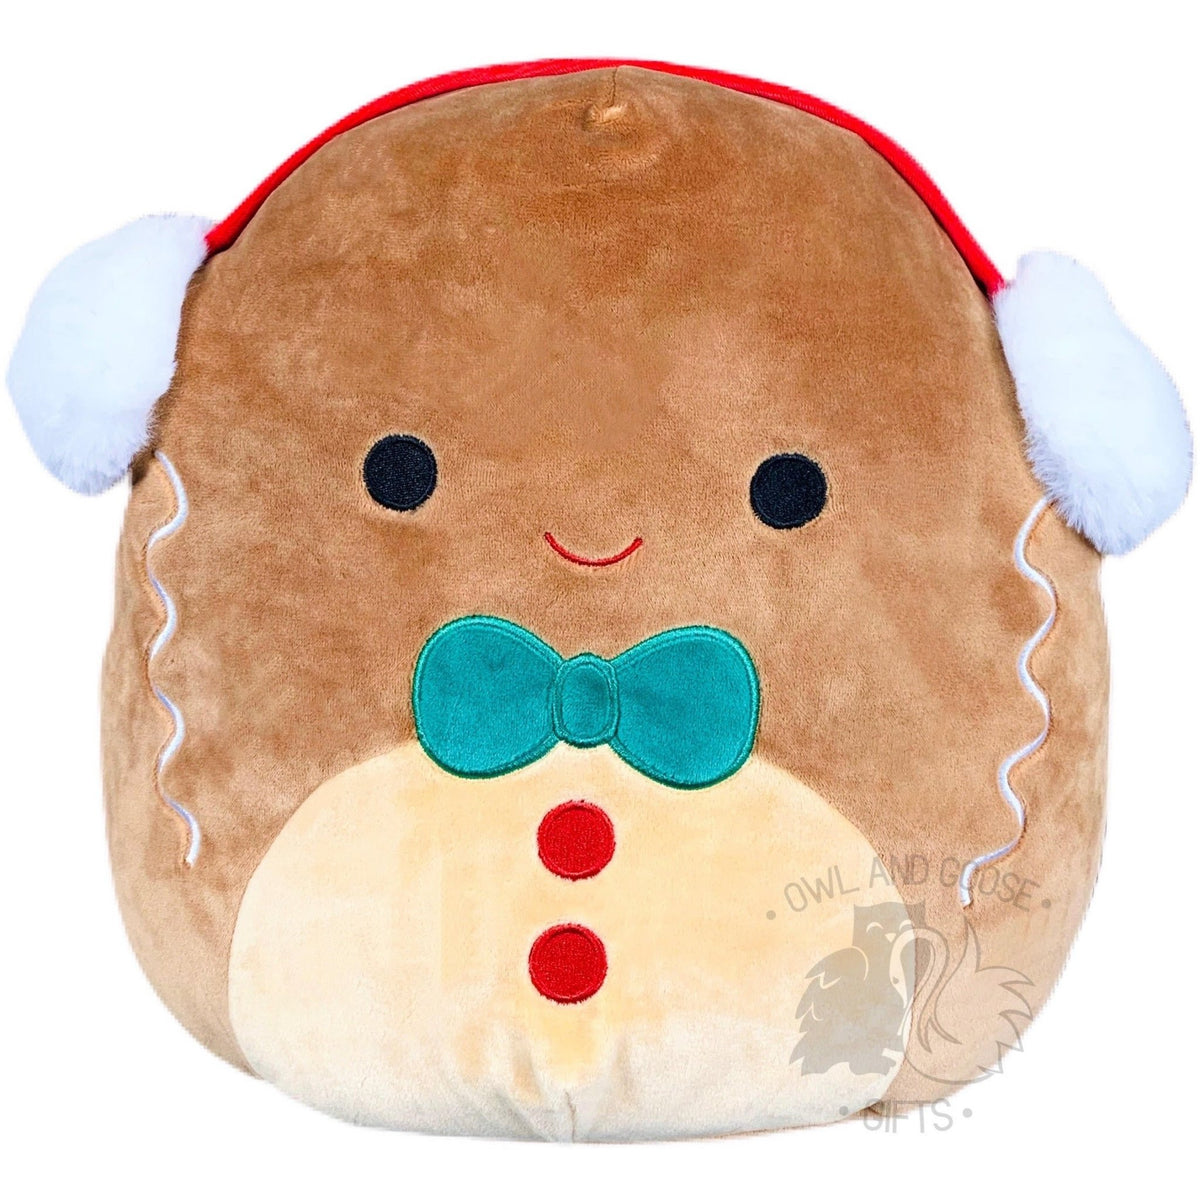 Squishmallow 12 Inch Jordan the Gingerbread Boy Christmas Plush Toy - Owl &  Goose Gifts